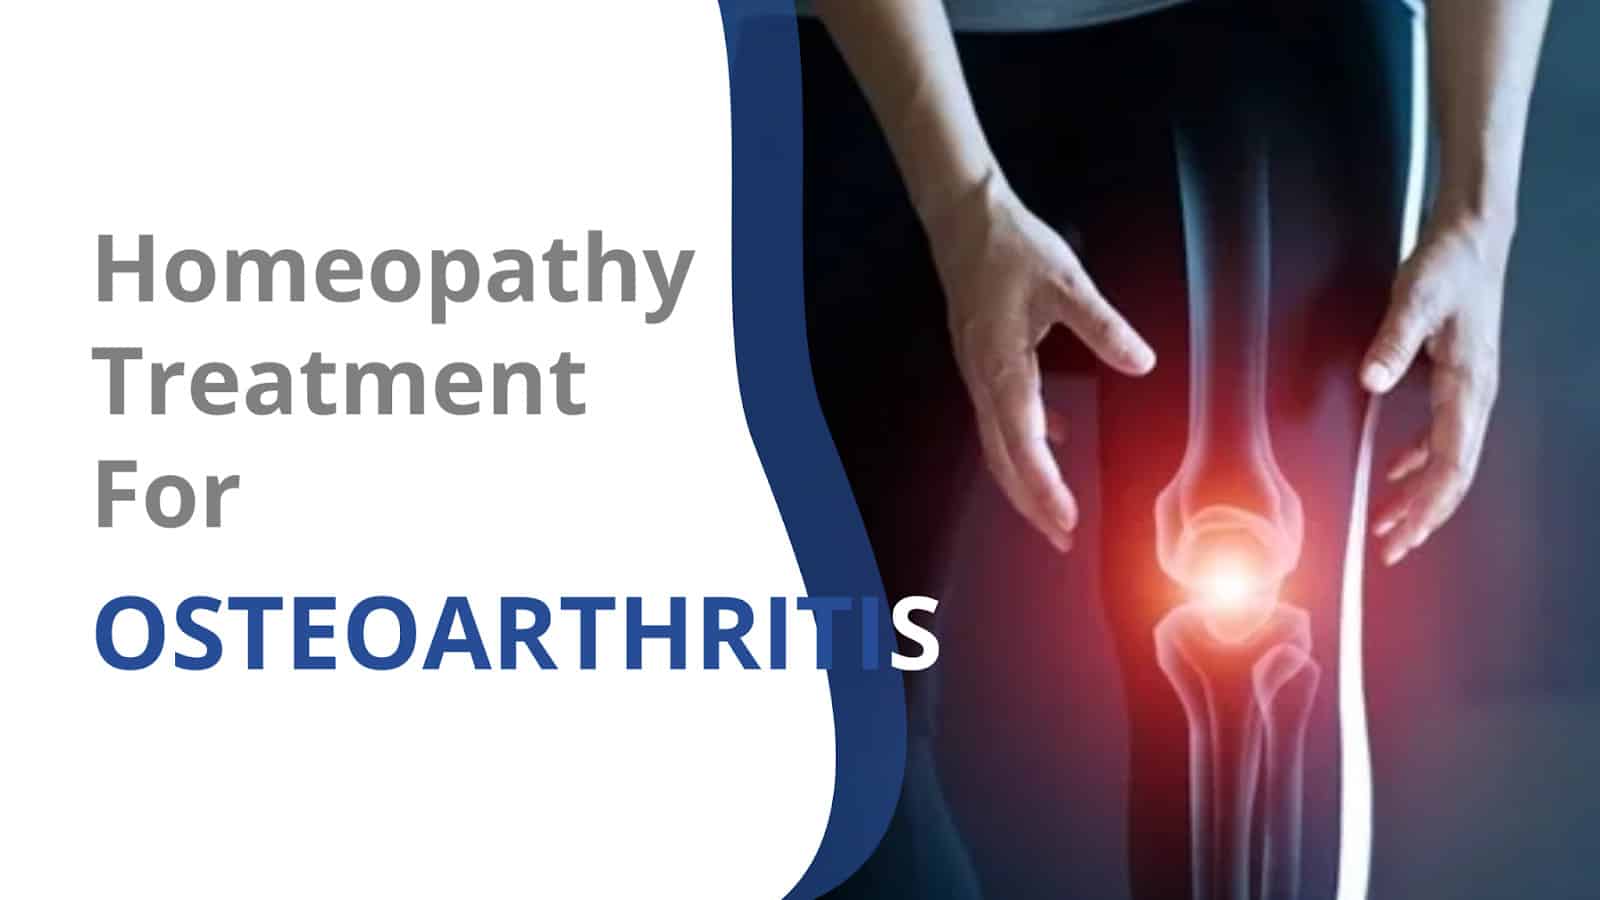 You are currently viewing Homeopathy Treatment for Osteoarthritis